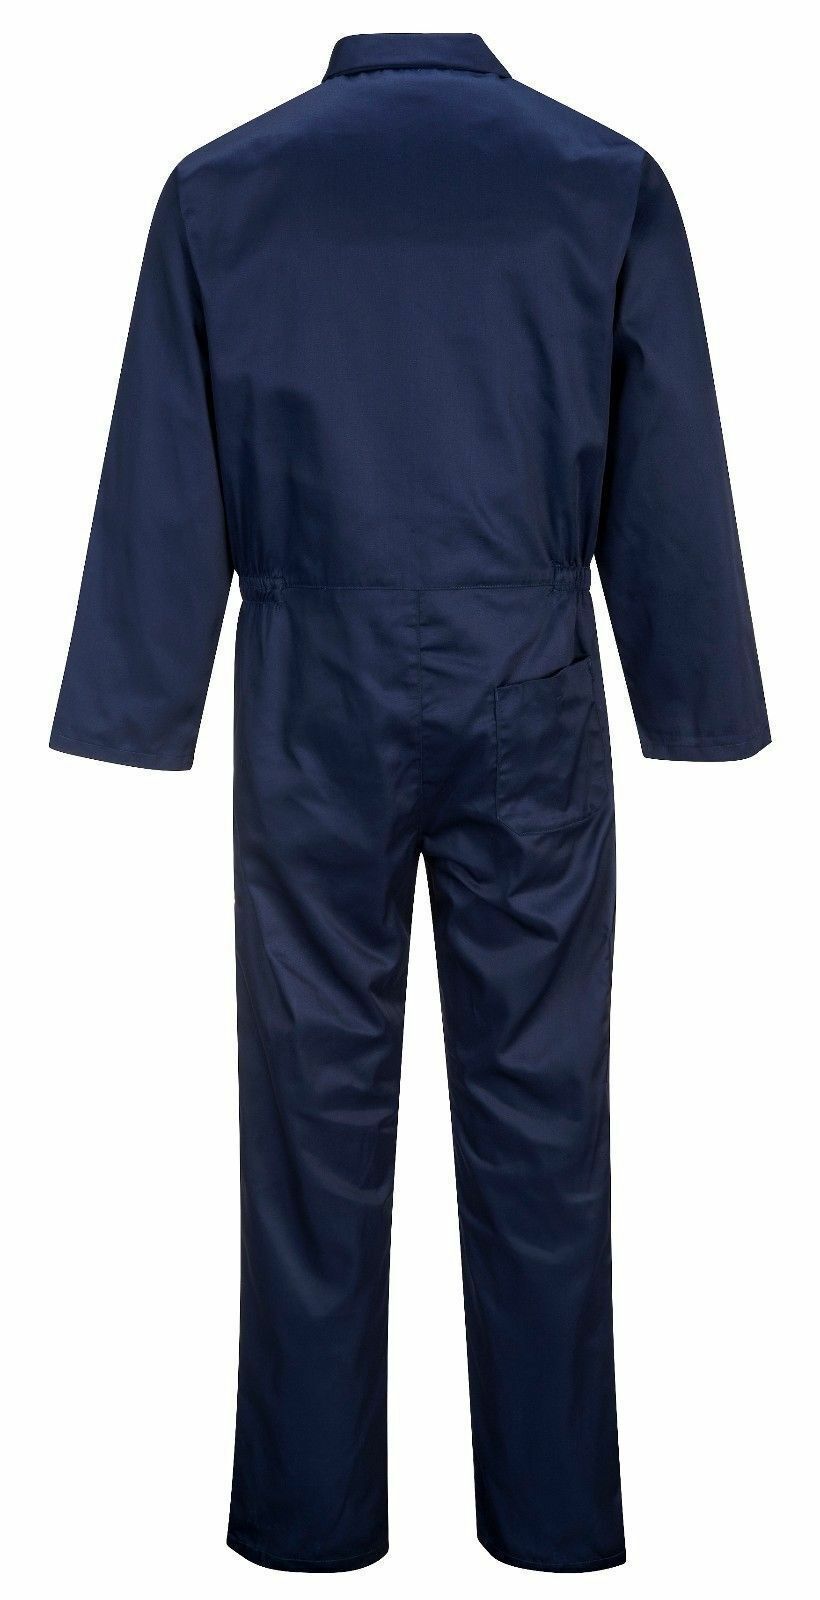 Portwest S999 Euro Work Polycotton Coverall Mechanic Jumpsuit Safety Overalls PORTWEST S999 - фотография #4